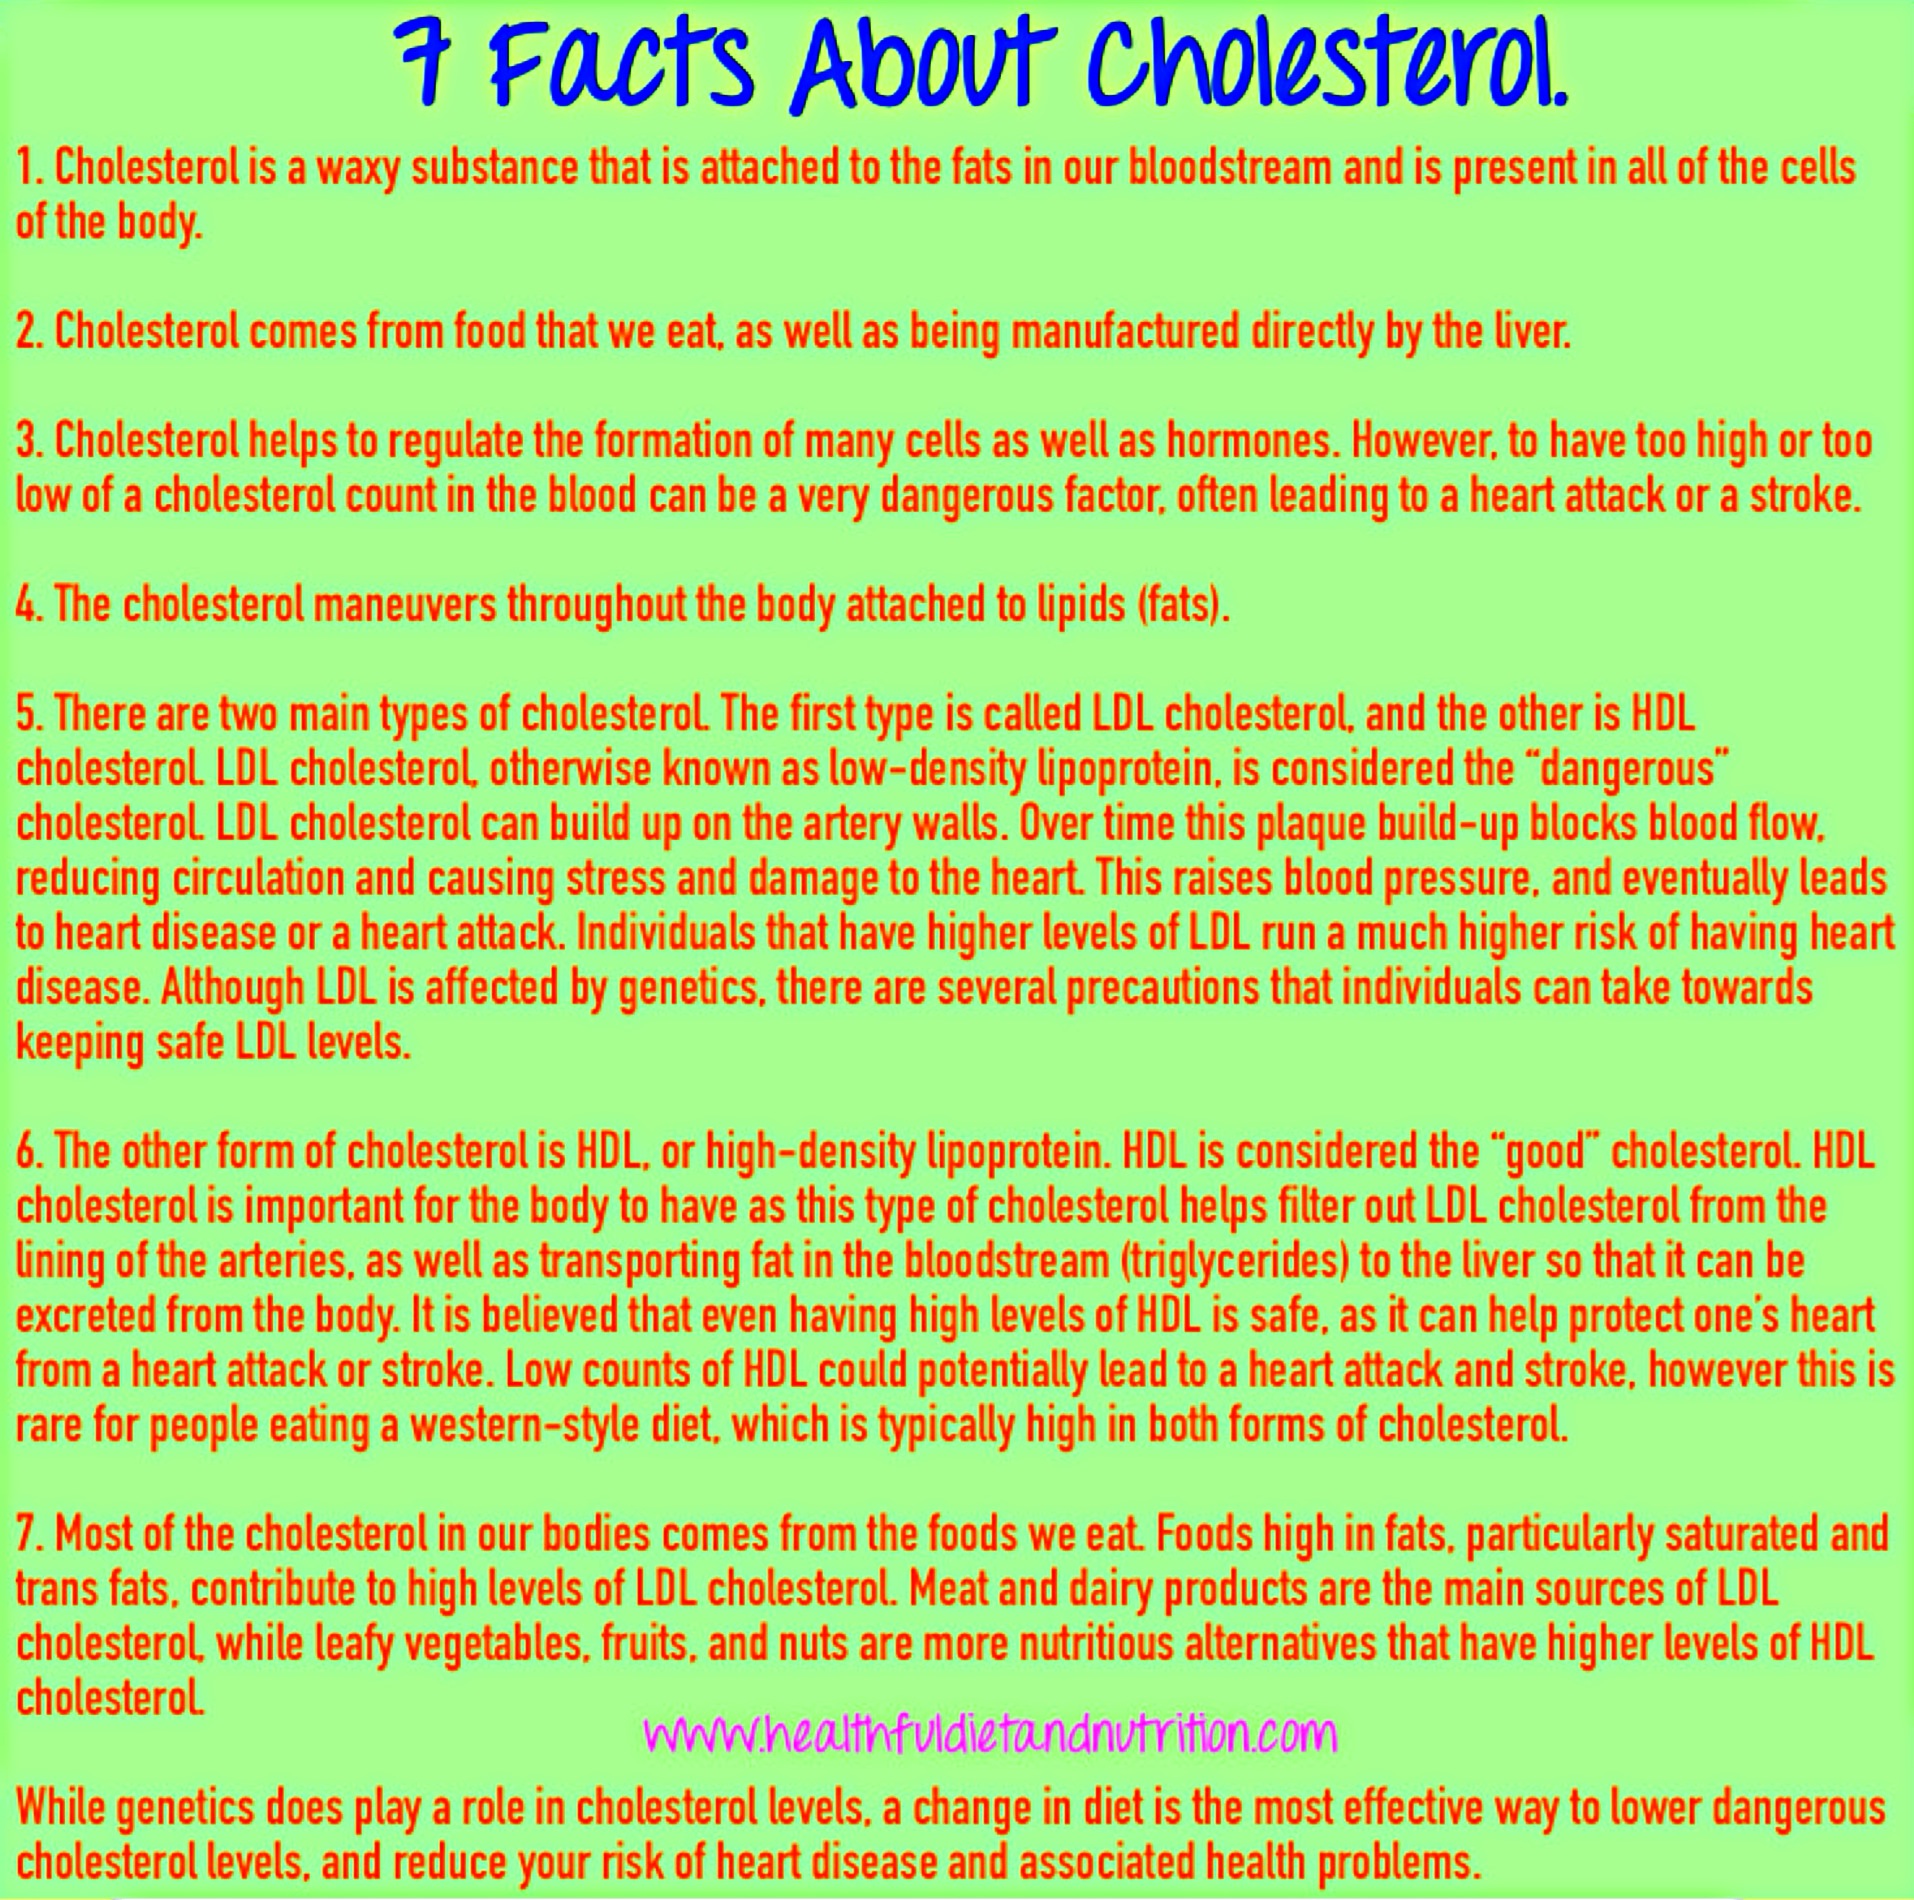 7 Facts About Cholesterol